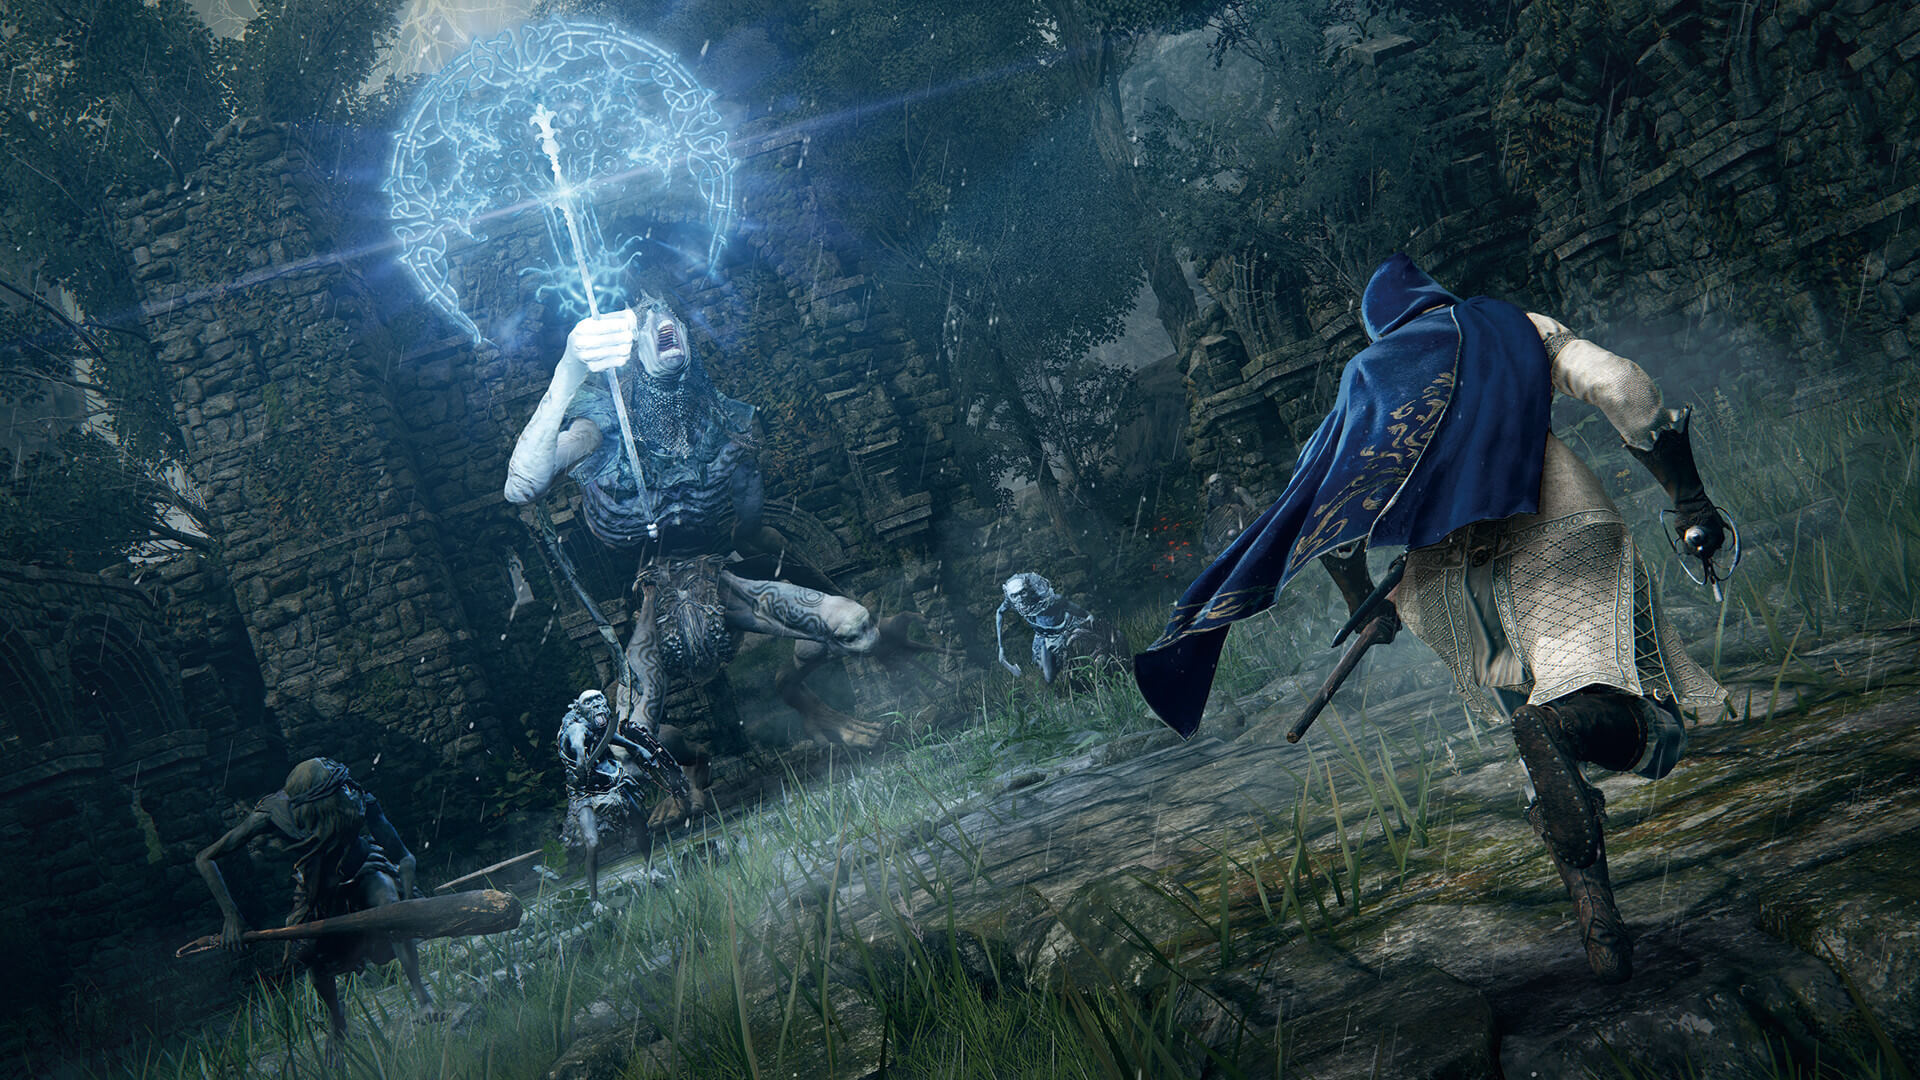 The player facing a magic enemy in Elden Ring